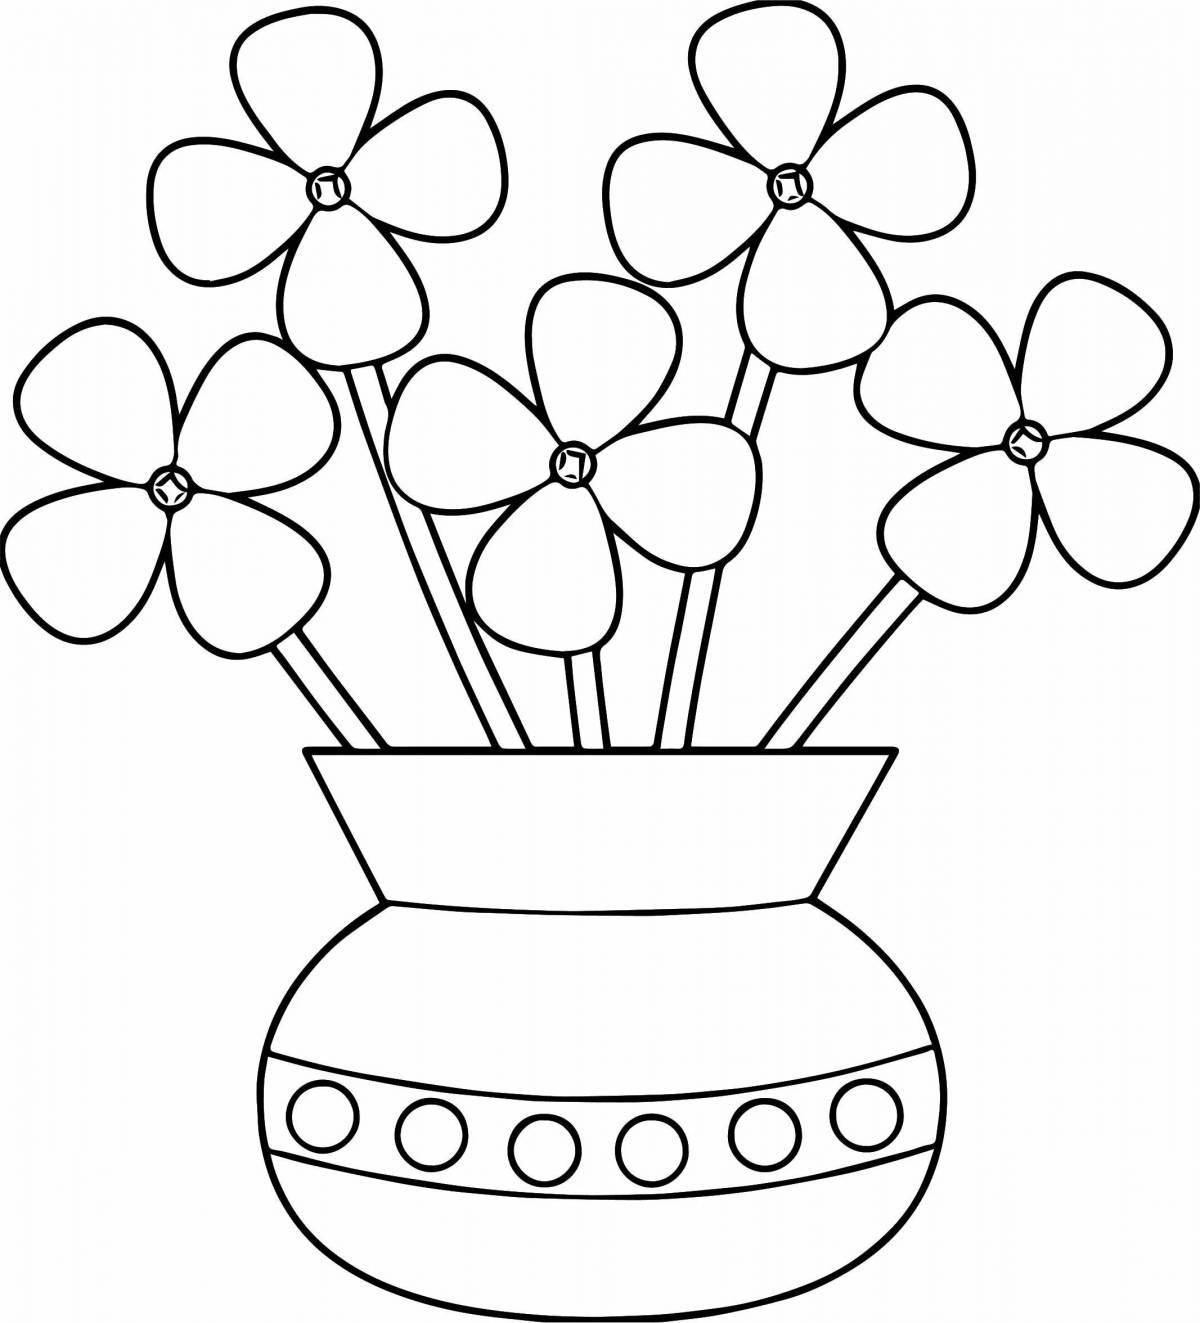 Fantastic flower coloring book for 4-5 year olds